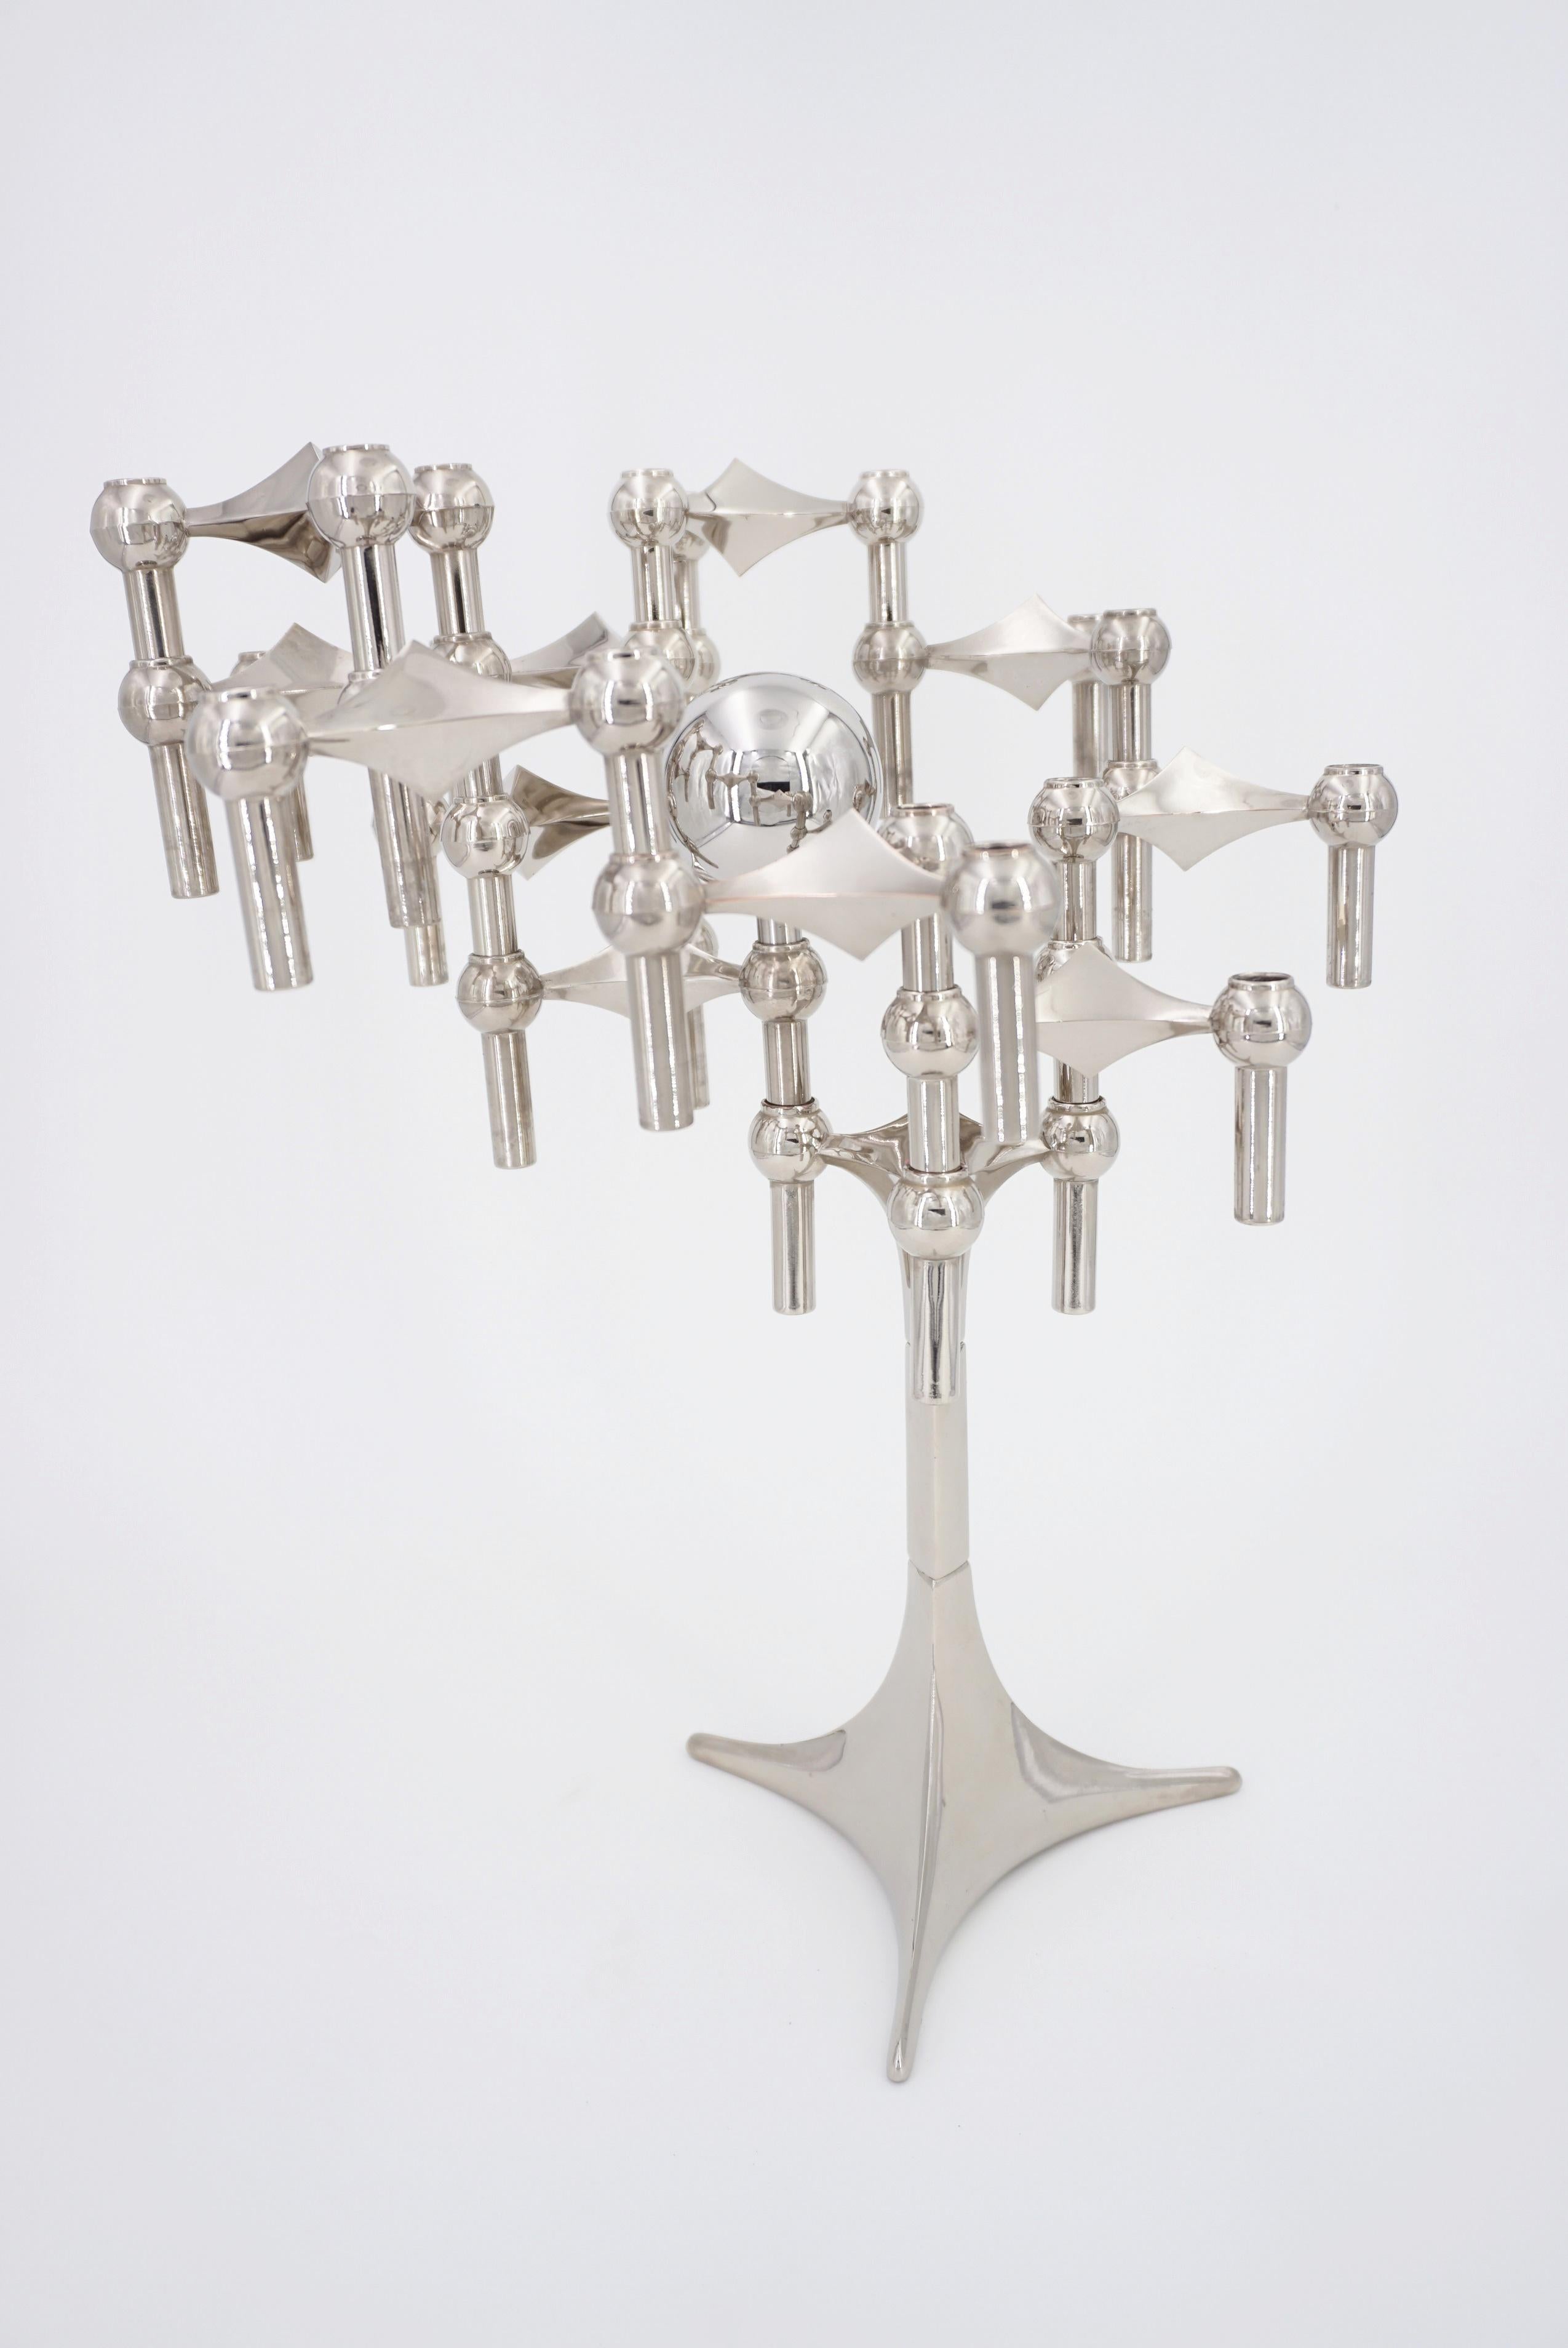 European Fritz Nagel 1960s Design Modular and Chrome Candle Holder Set of S22 Collection